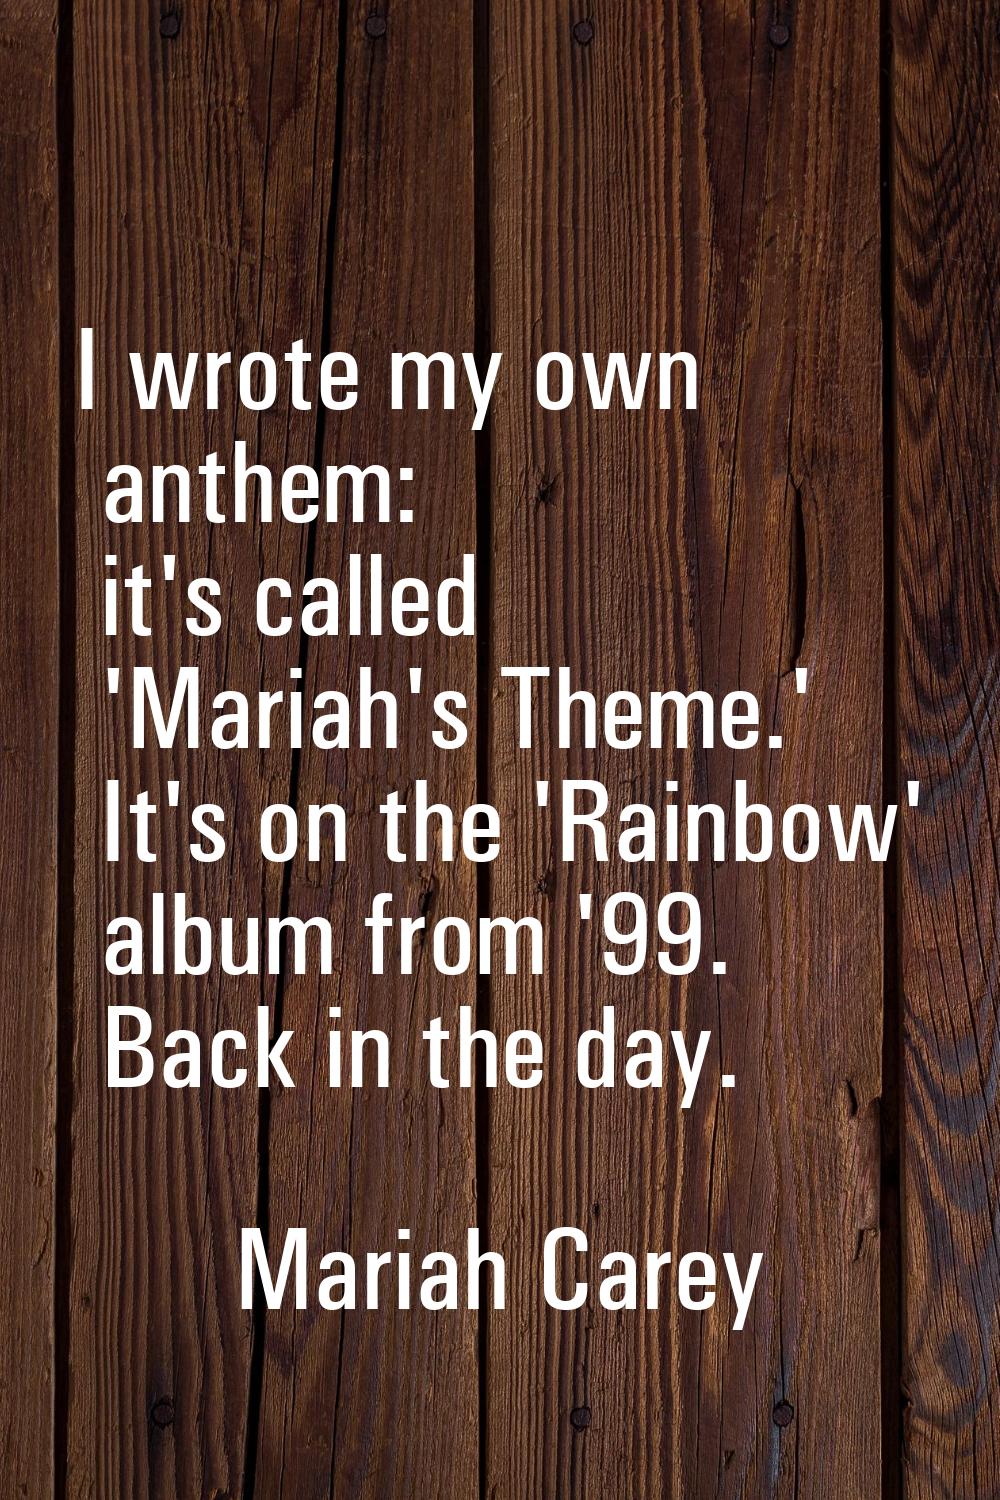 I wrote my own anthem: it's called 'Mariah's Theme.' It's on the 'Rainbow' album from '99. Back in 